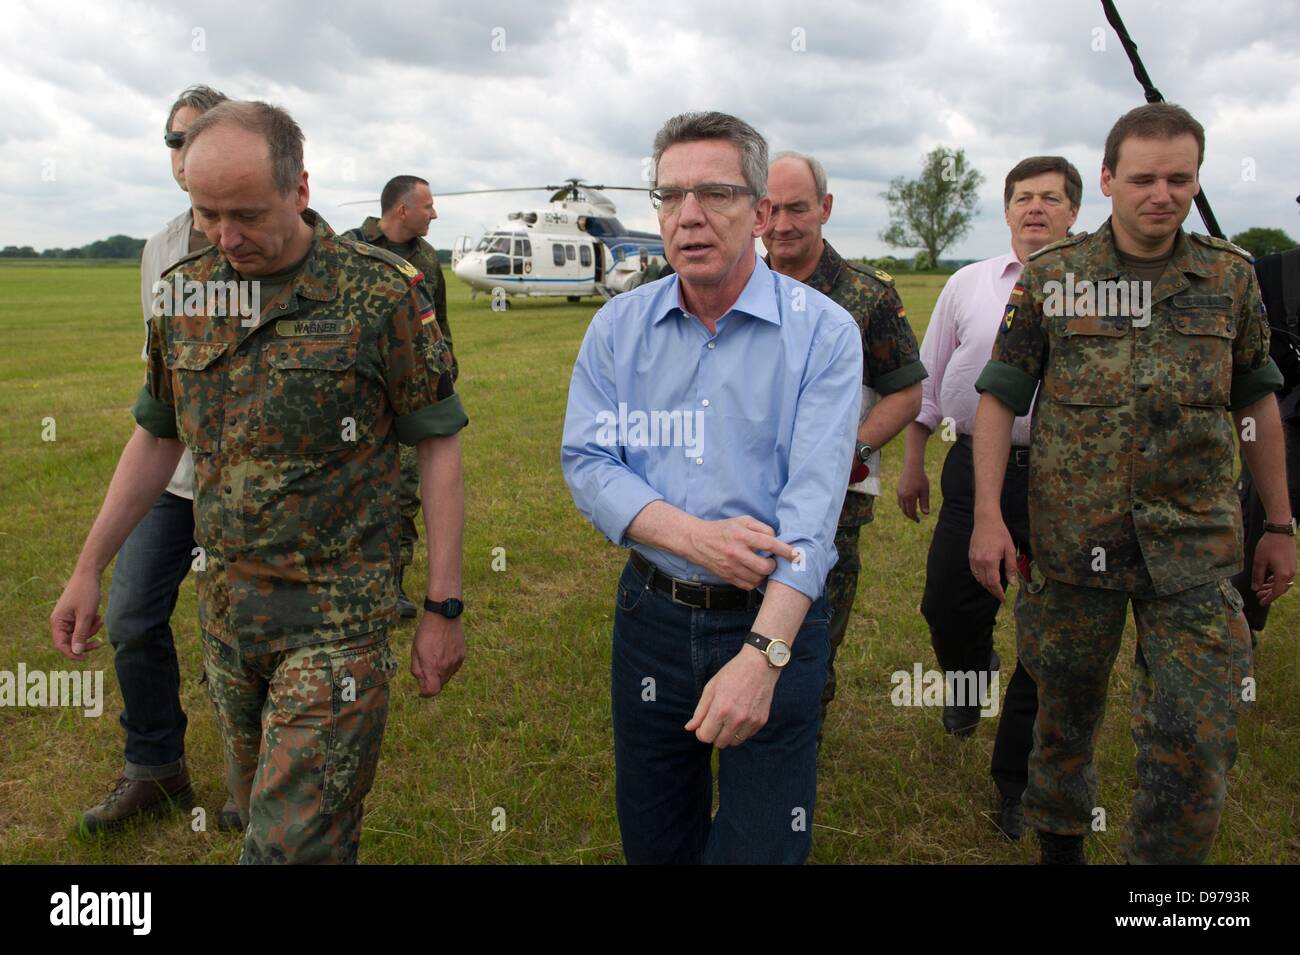 Penkefitz, Germany. 13th June, 2013. German Defence Minister Thomas de Maiziere visits soldiers of the Bundeswehr at a dike near Penkefitz, Germany, 13 June 2013. Soldiers of the logistics battalion 141 from Neustadt am Ruebenberge reinforced dikes with sandbags in the area Luechow-Dannenberg. Photo: Sebastian Kahnert/dpa/Alamy Live News Stock Photo